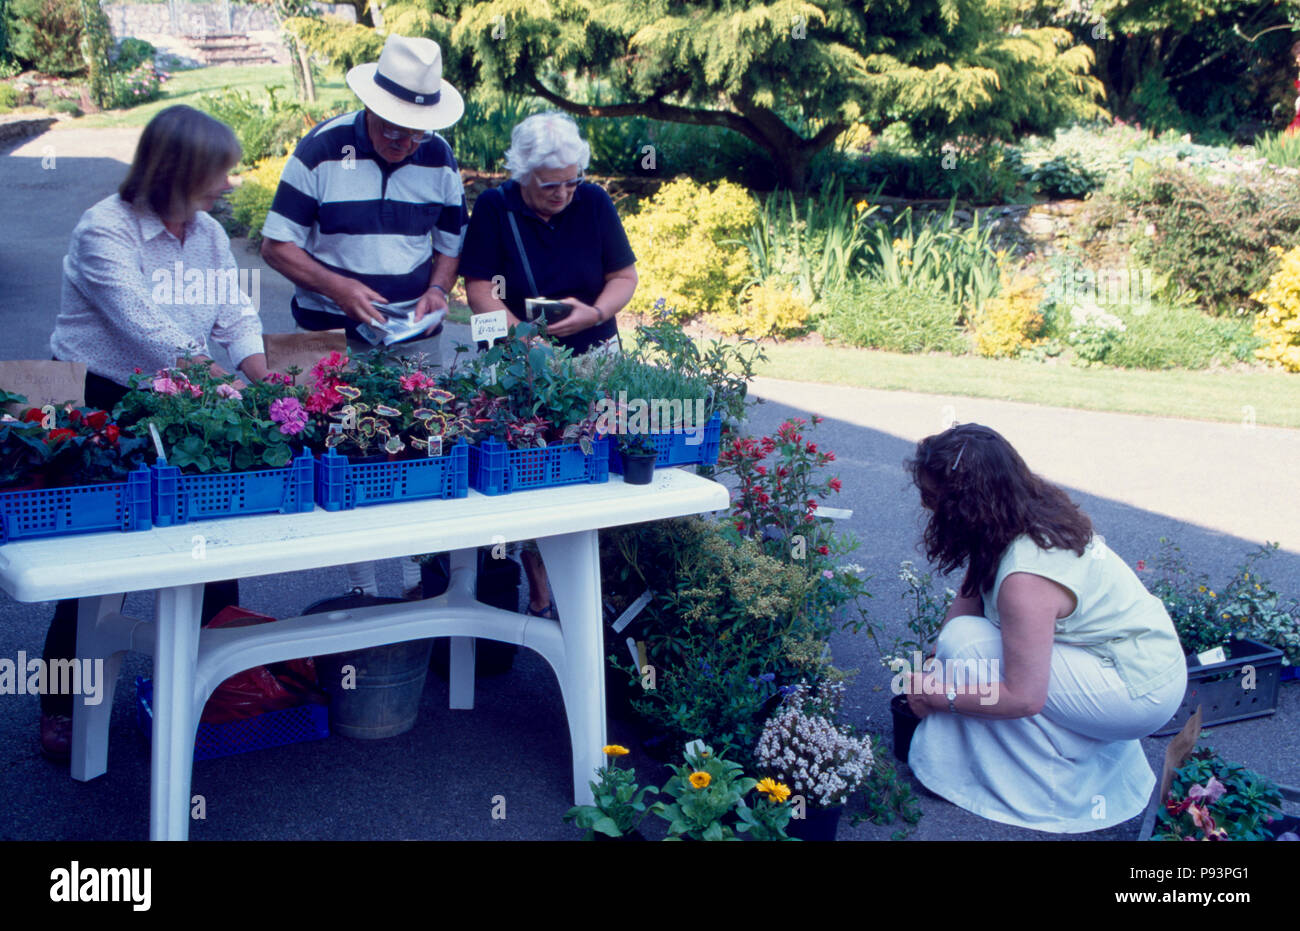 People at a roadside plant sale         FOR EDITORIAL USE ONLY Stock Photo